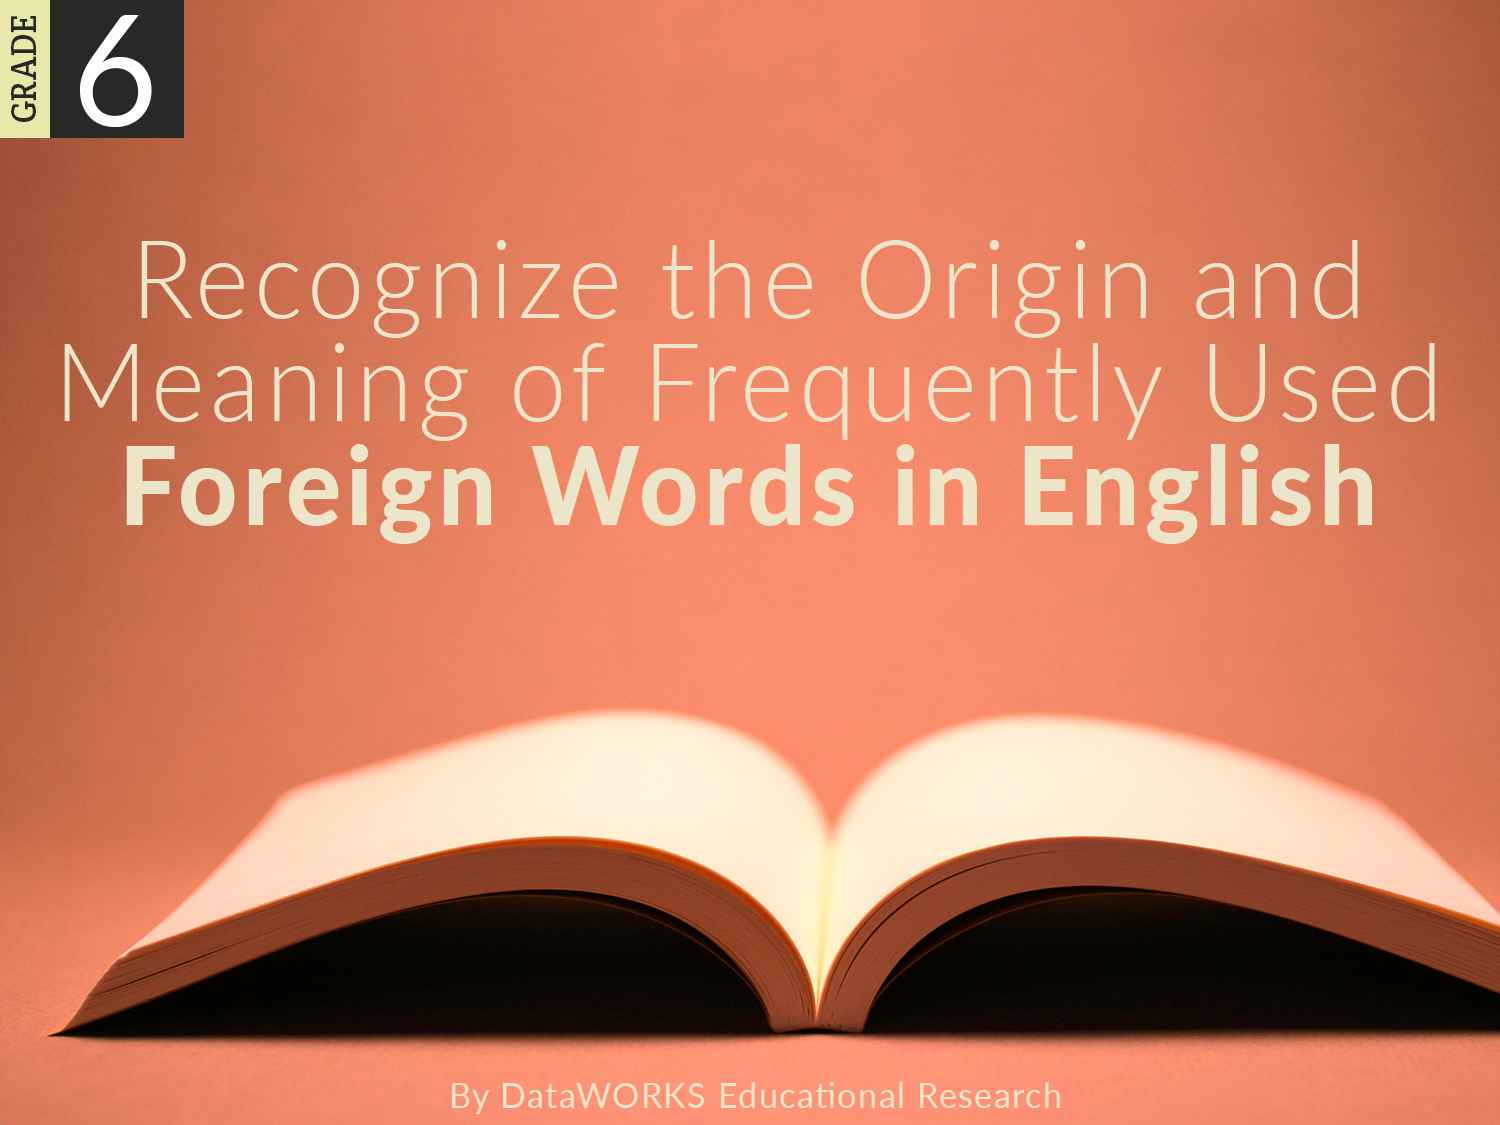 ppt-foreign-words-in-english-powerpoint-presentation-free-download-id-244537